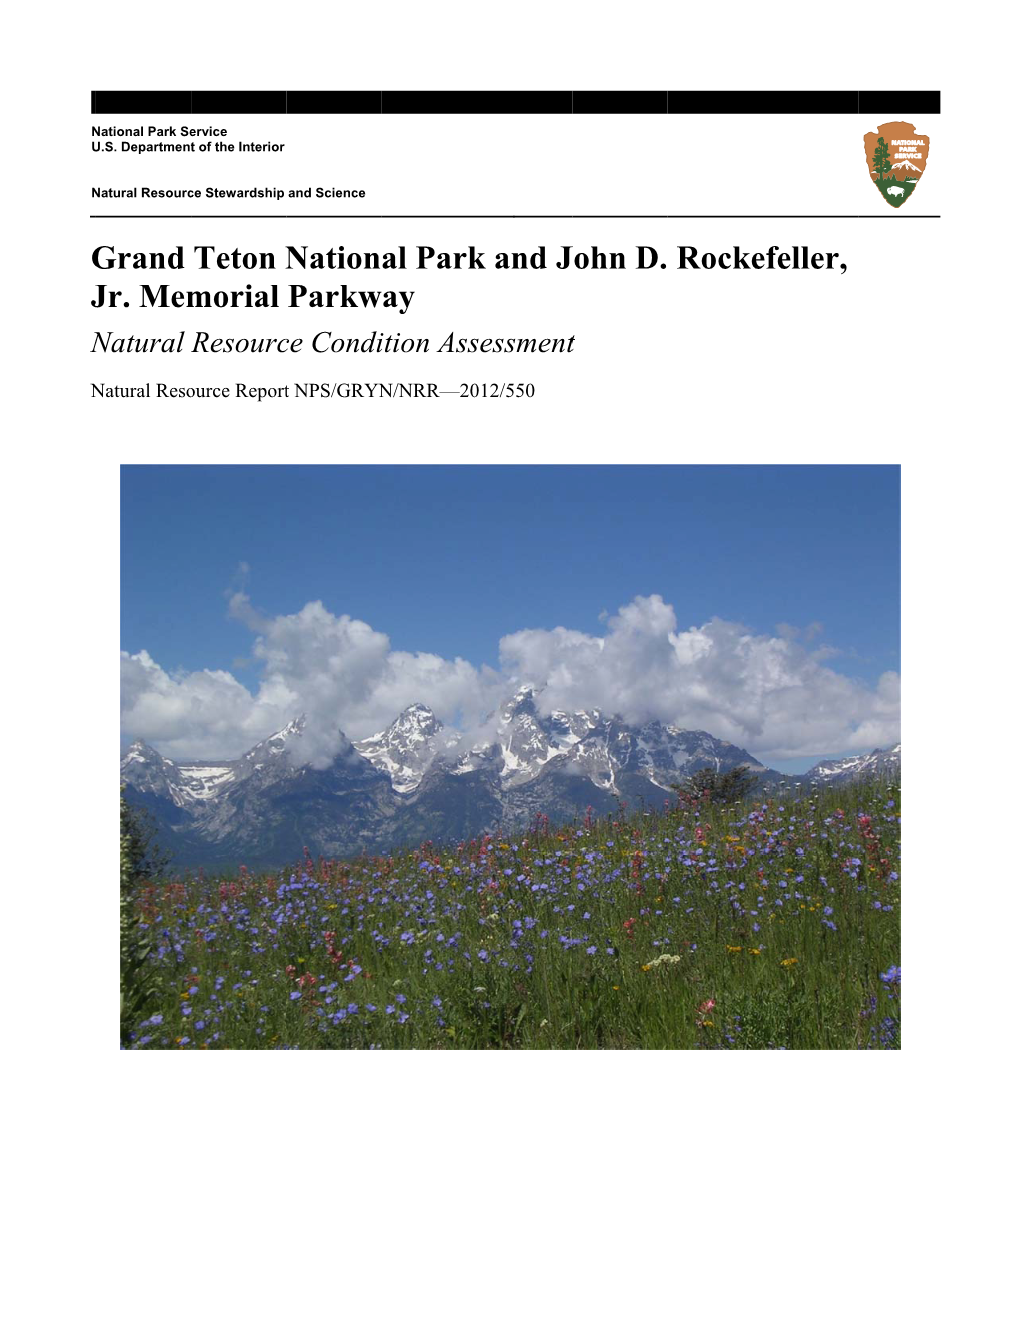 Natural Resource Condition Assessment, Grand Teton National